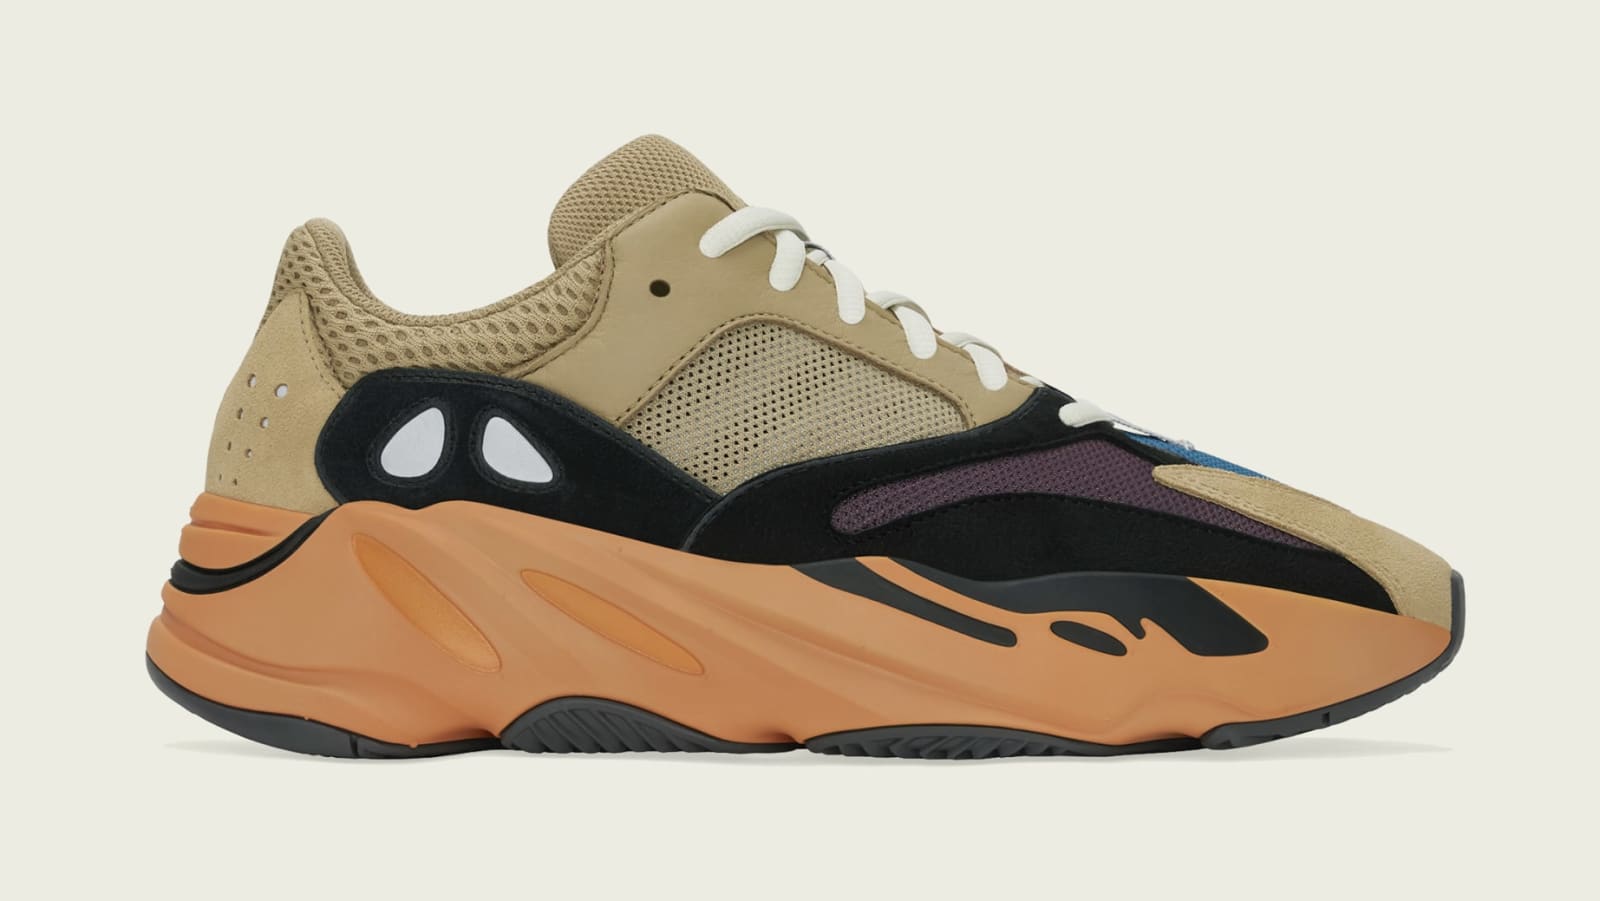 Adidas Yeezy Boost 700 "Enflame Amber" Releases Tomorrow: Details 2